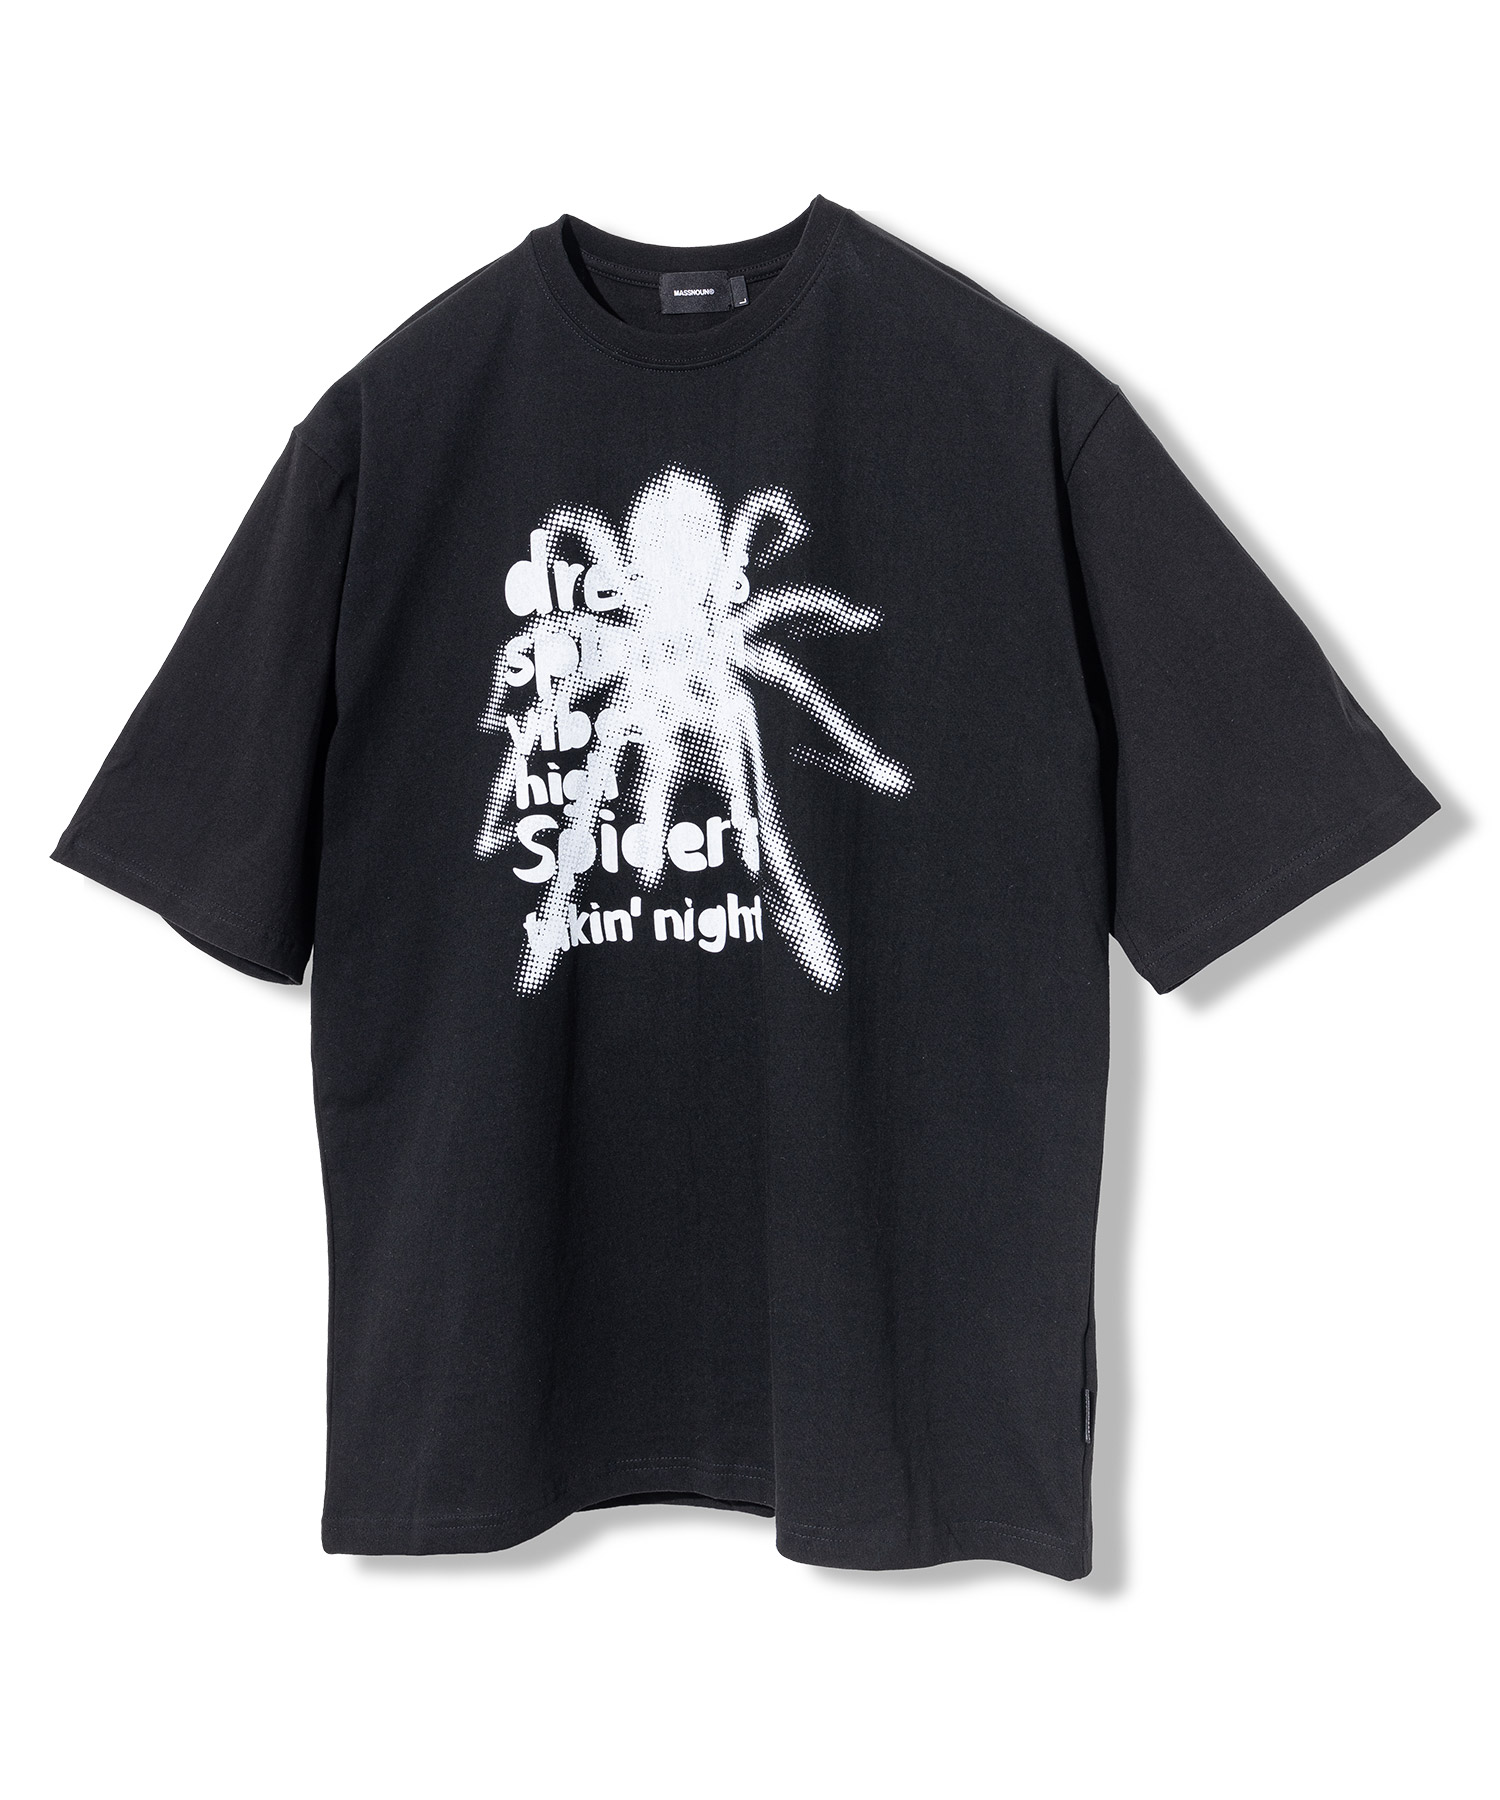 SPIDER REAL OVERSIZED SHORT T-SHIRTS MSFTS001-BK